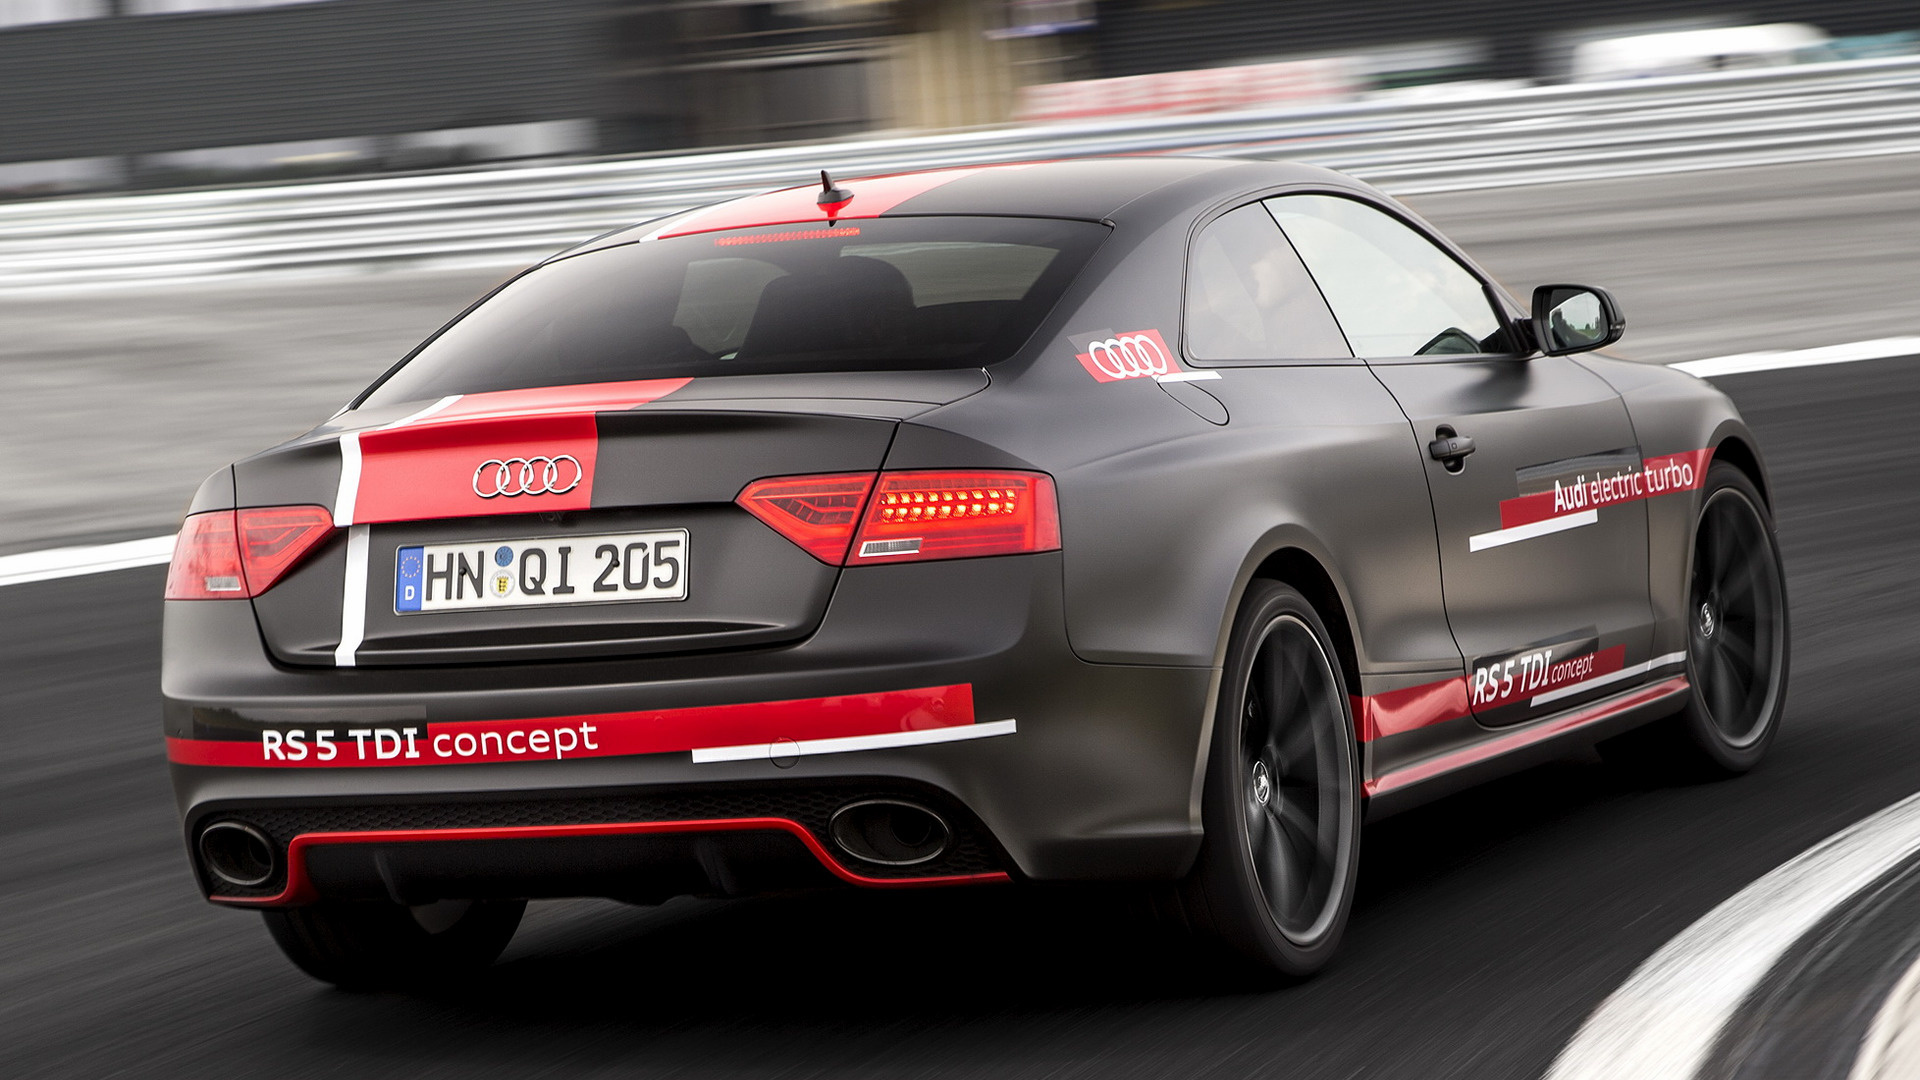 2014 Audi Rs 5 Tdi Concept Wallpapers And Hd Images Car Pixel